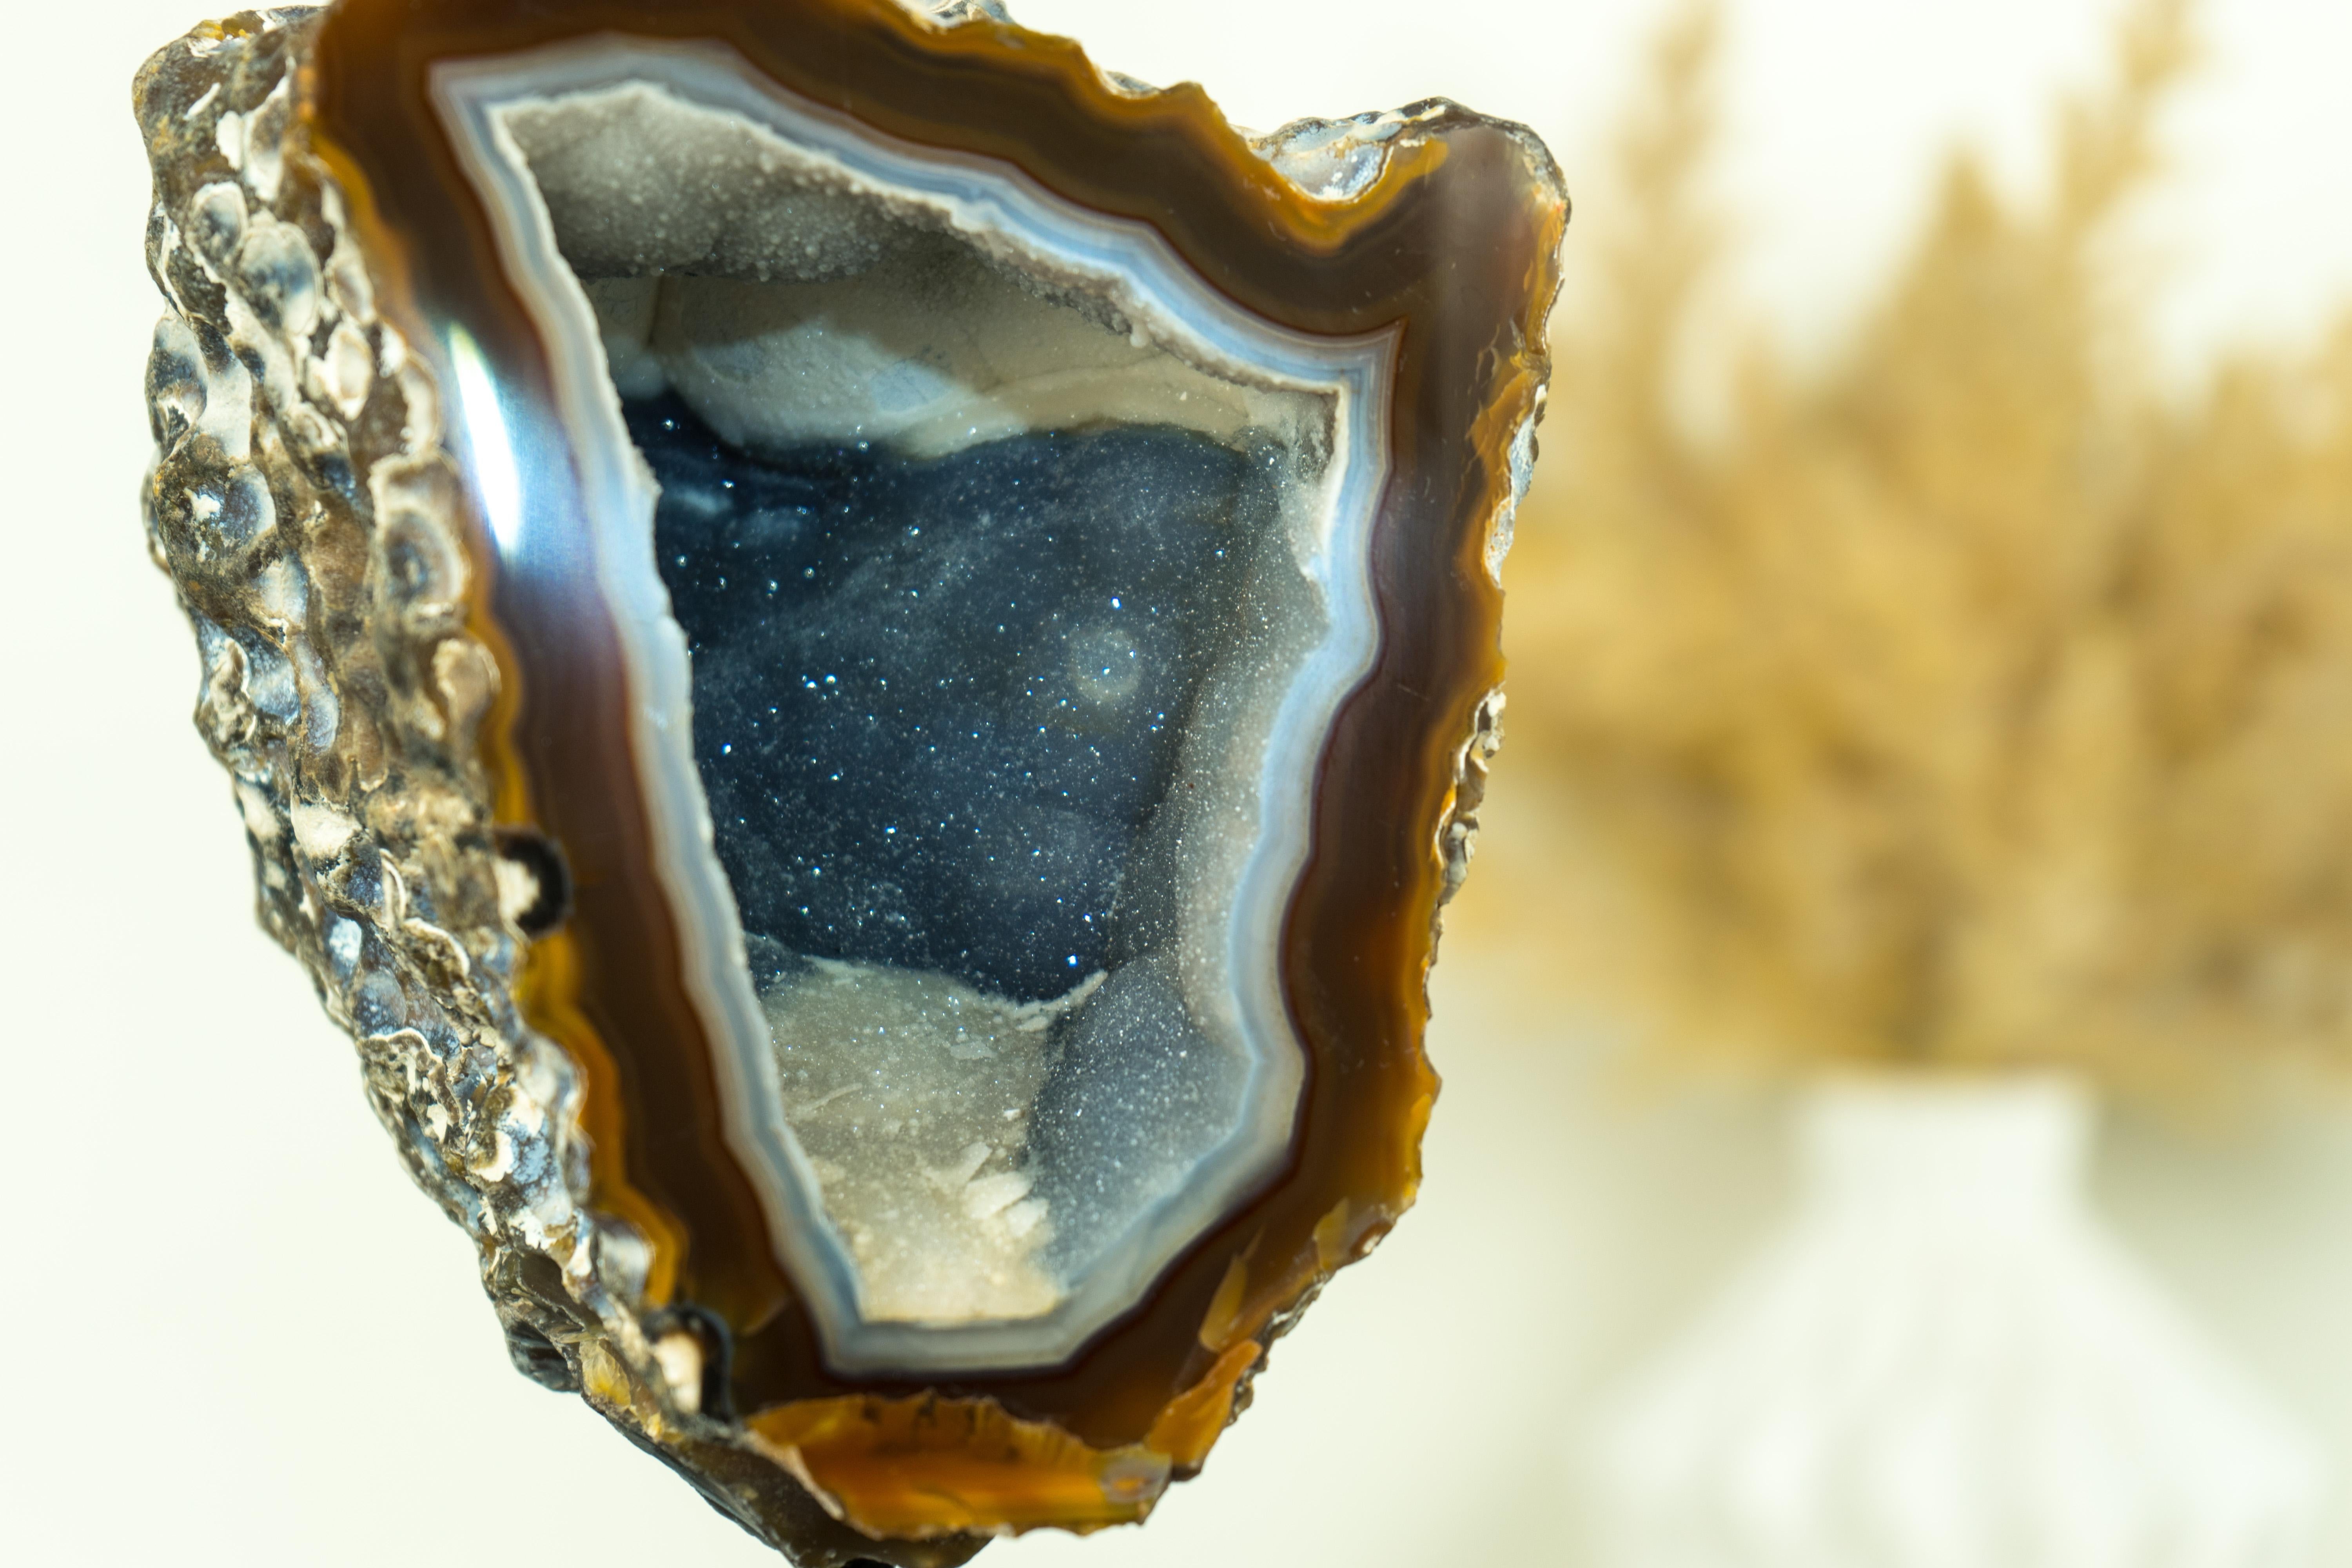 Gallery Grade Amber and White Lace Agate Geode with Blue Galaxy Druzy For Sale 6